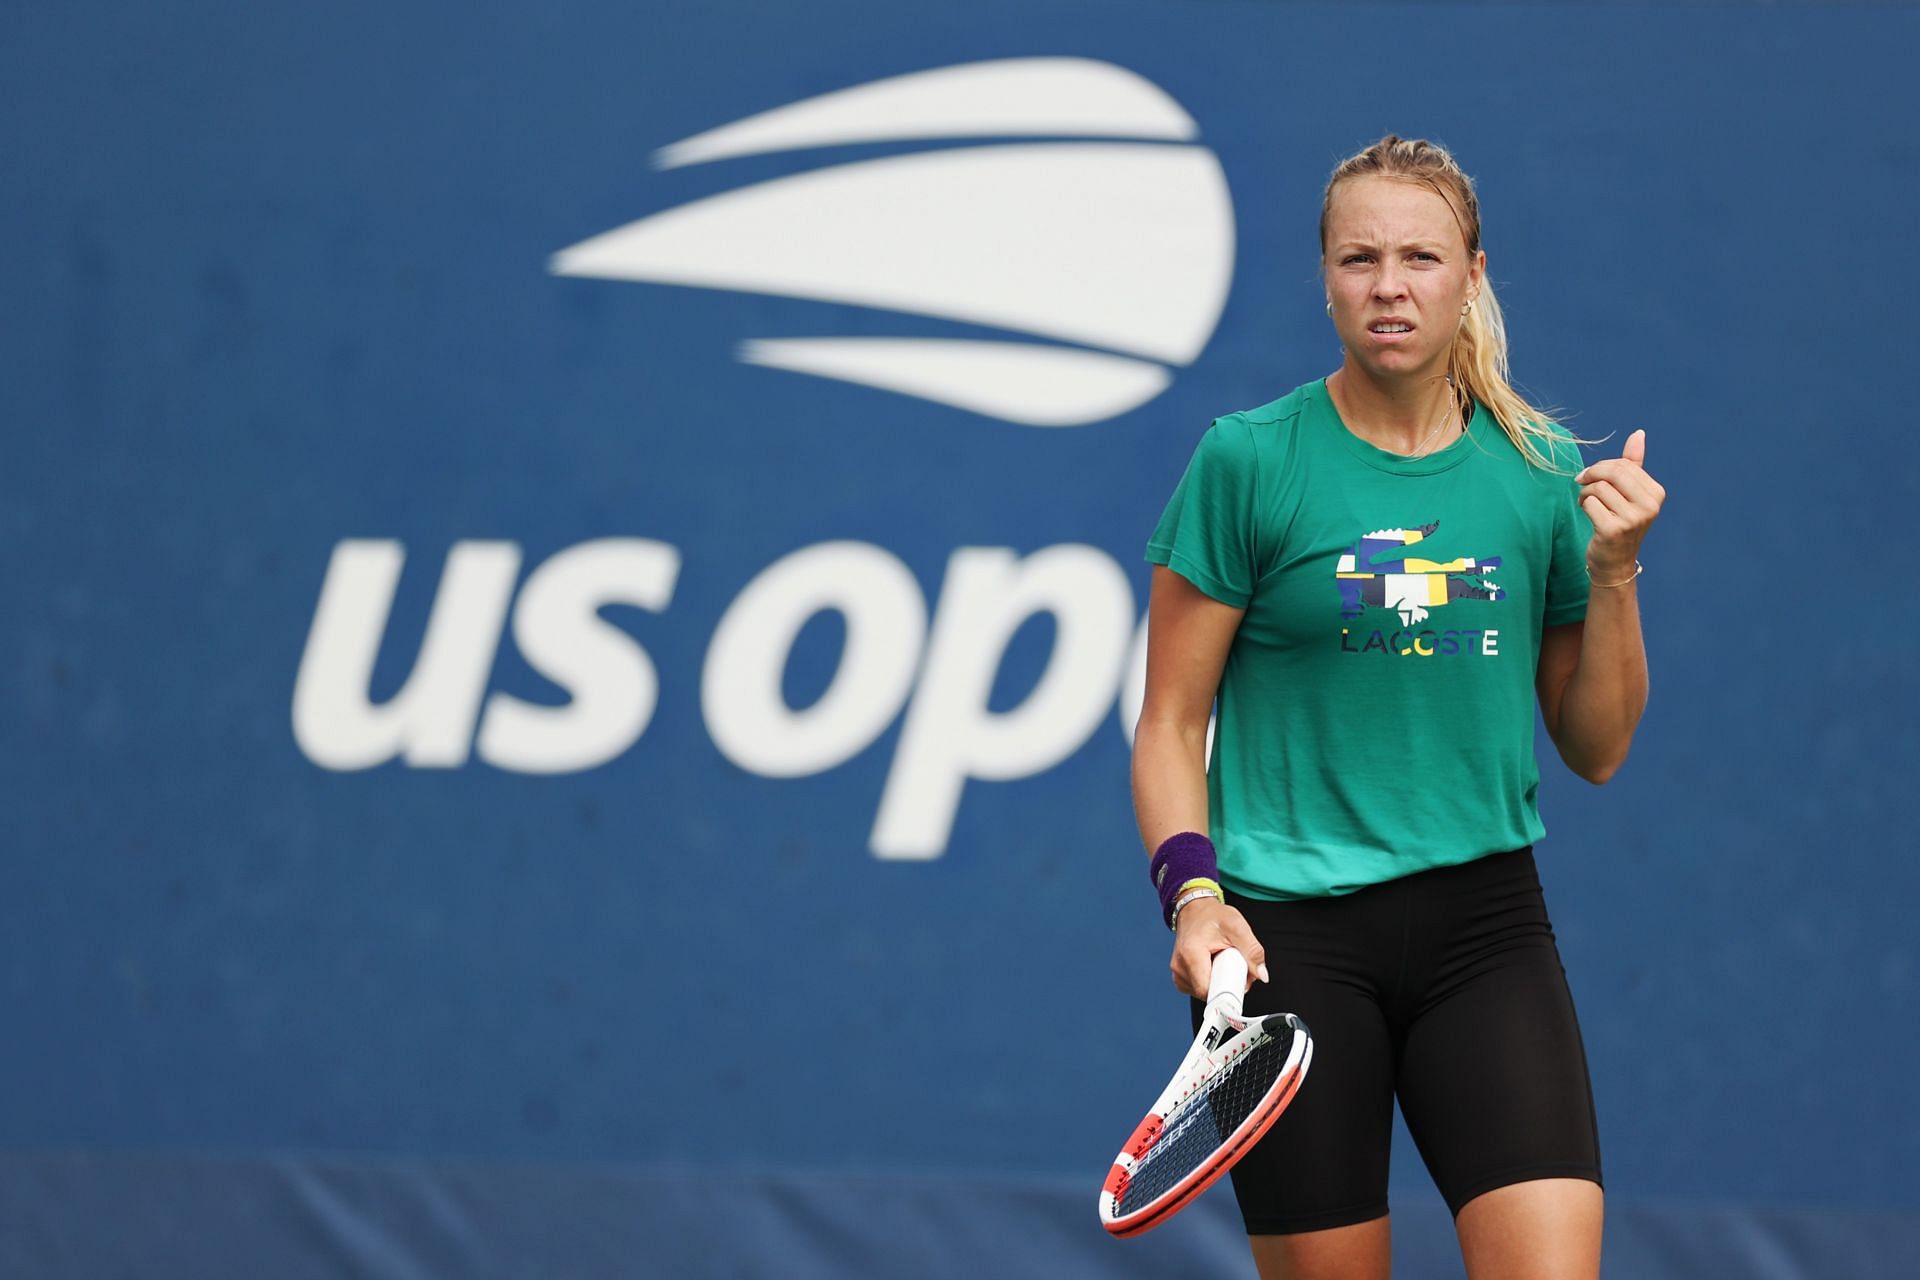 Anett Kontaveit at the US Open